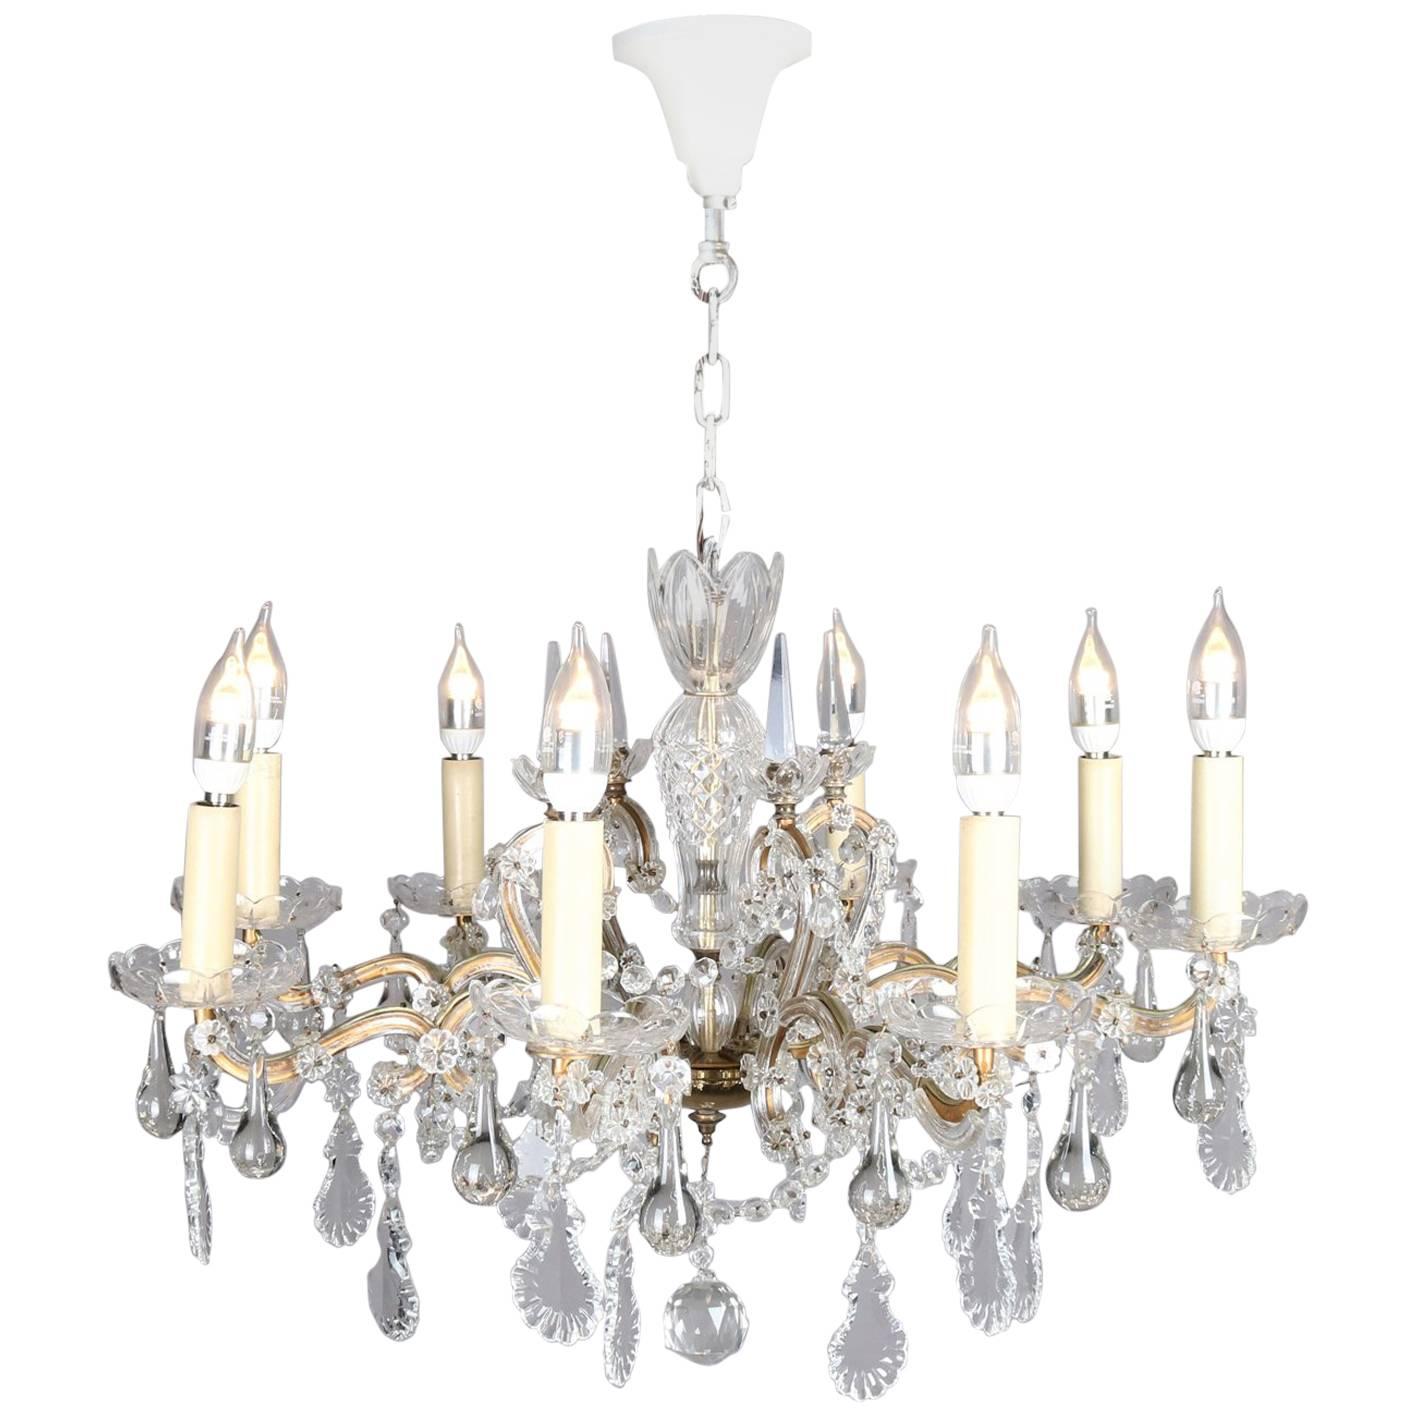 Continental French Bronze and Cut Crystal Eight-Arm Chandelier, 20th Century